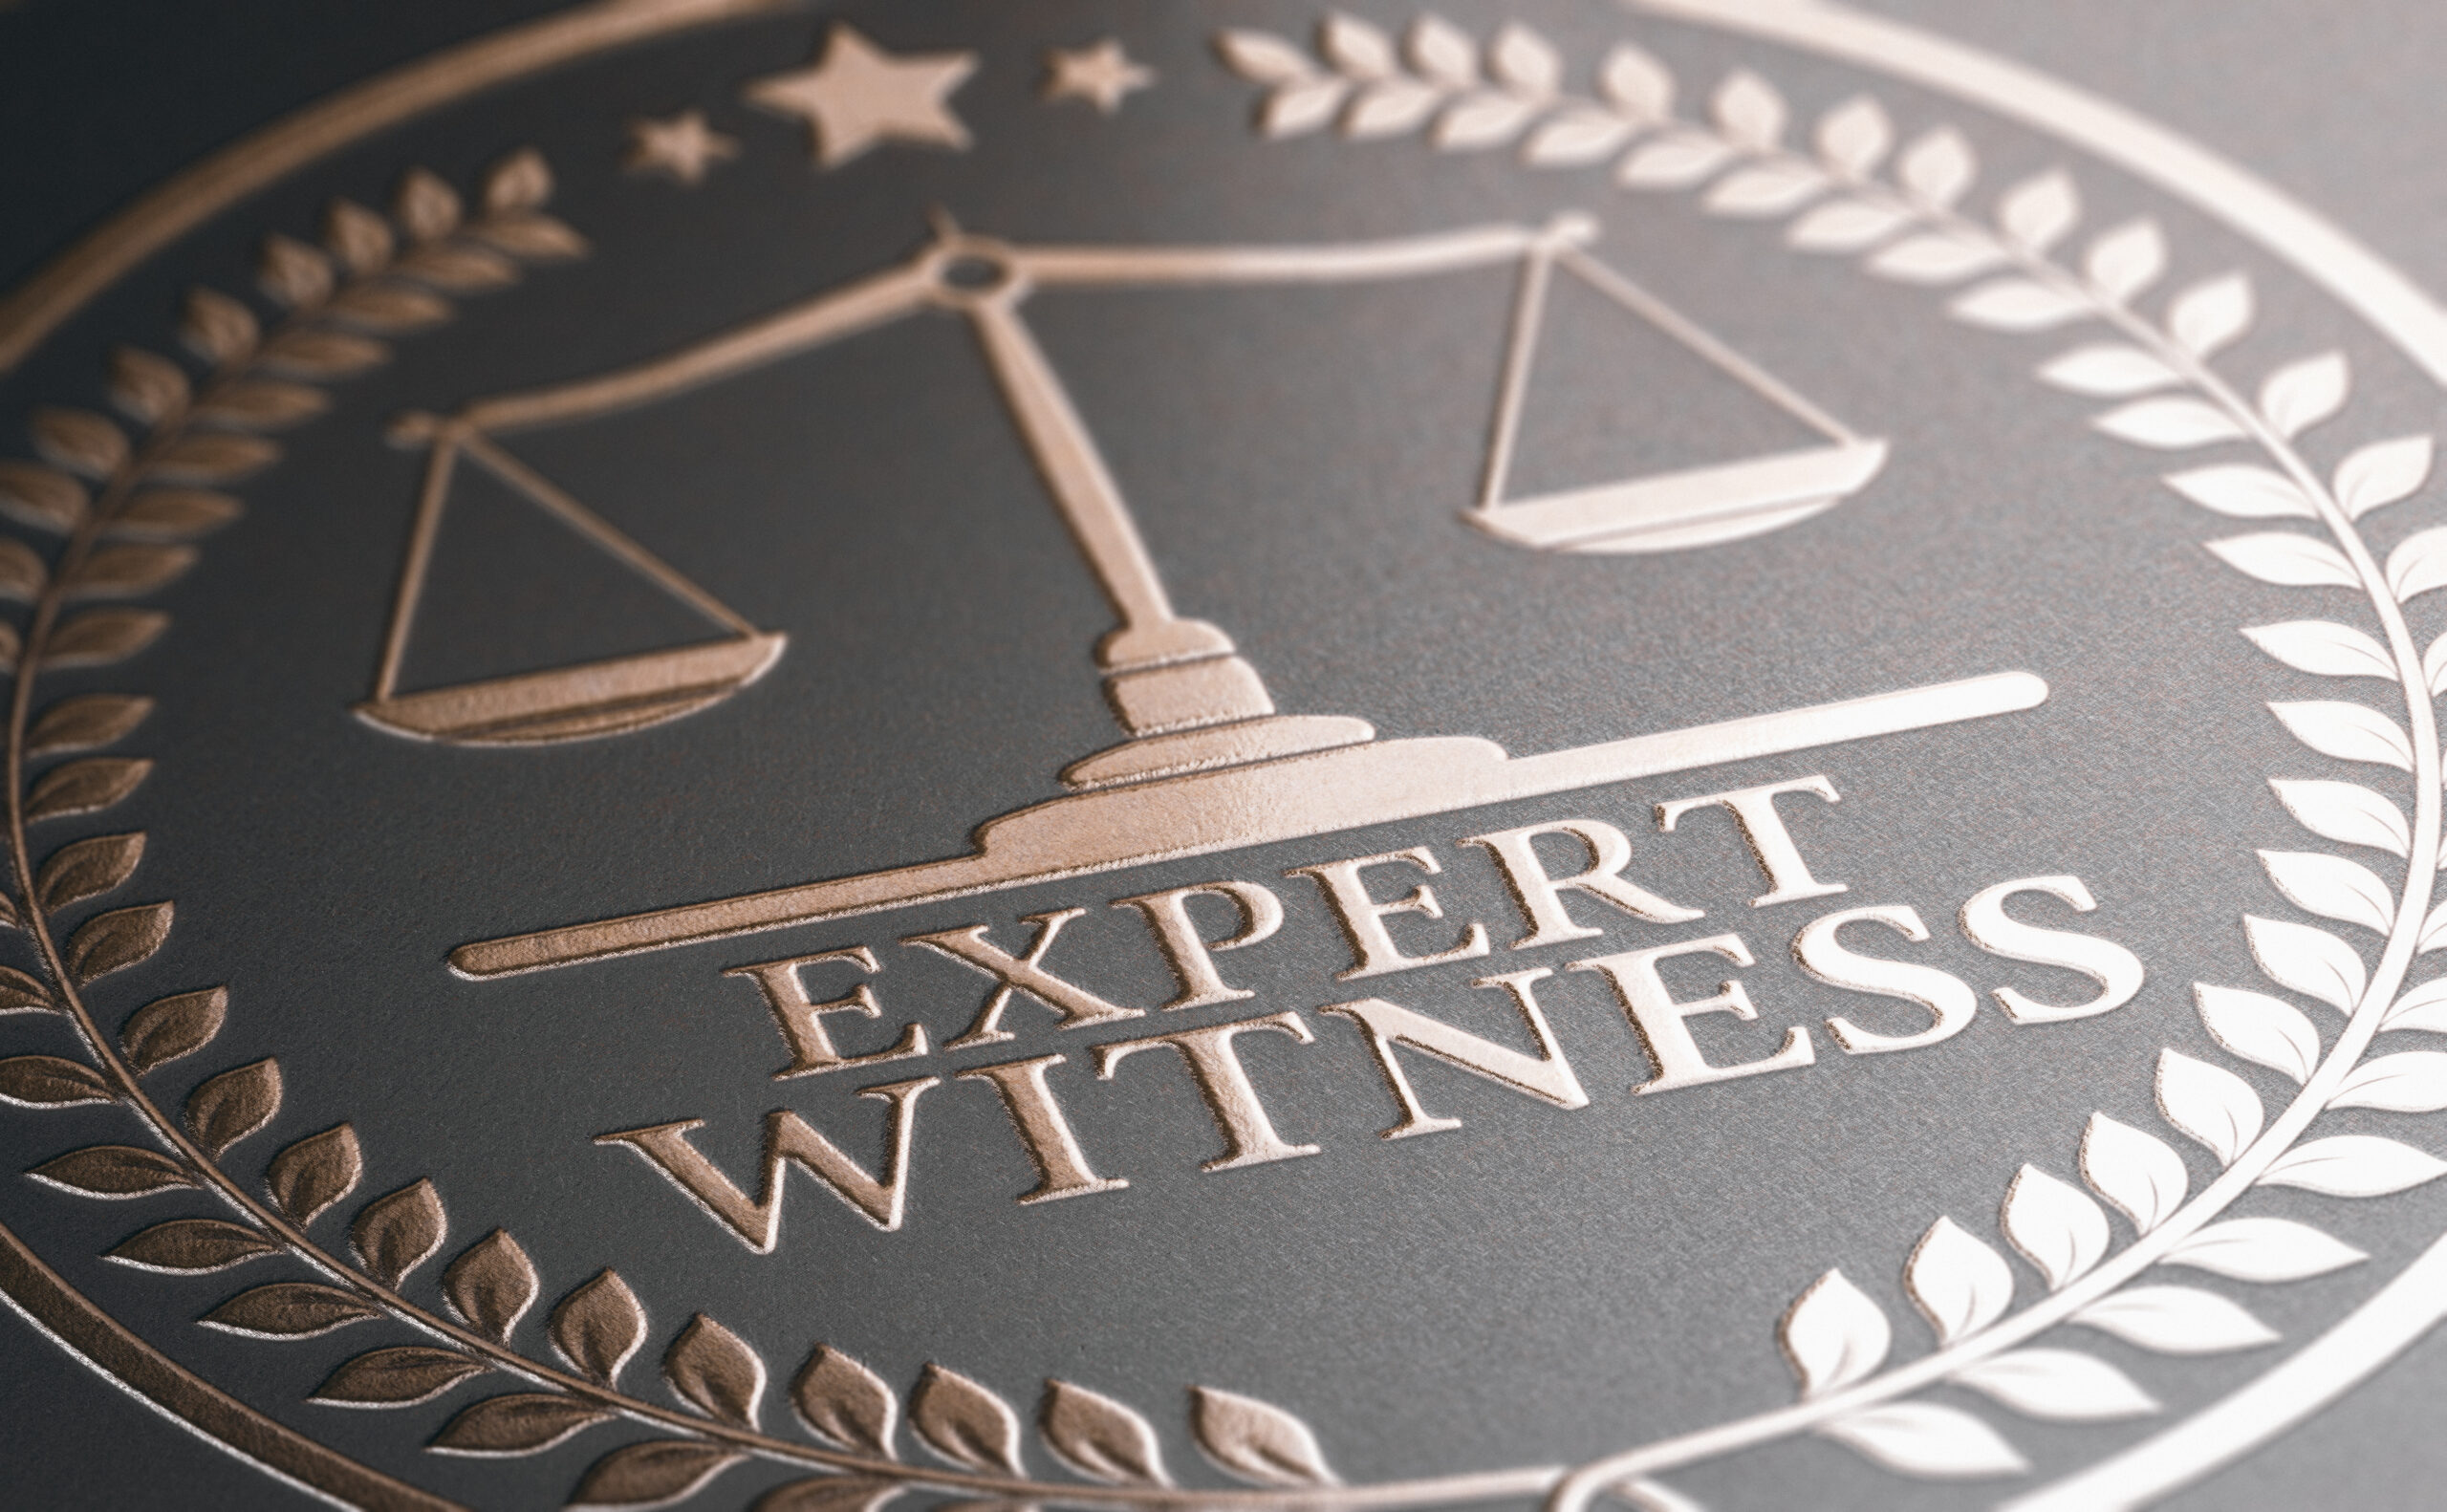 Expert Witness scaled